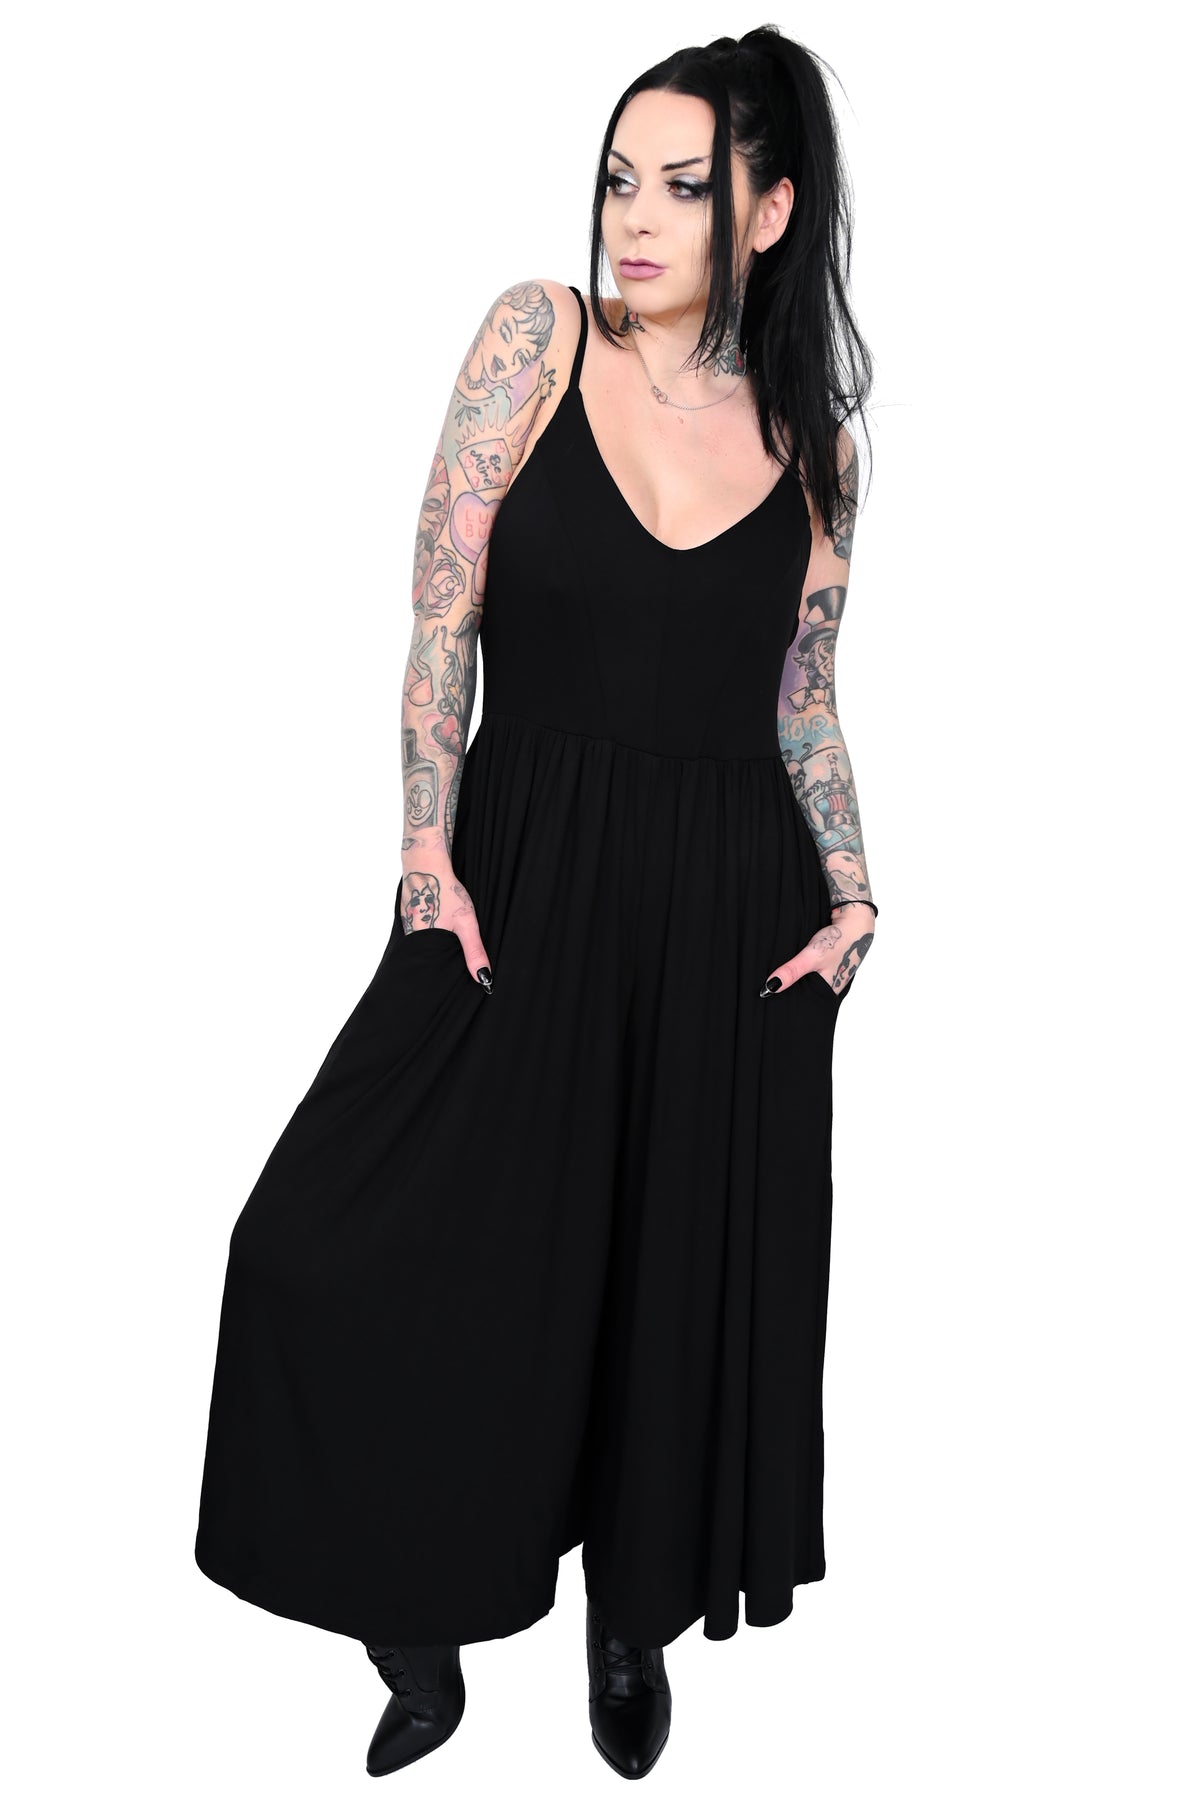 Drop crotch spaghetti strap jumpsuit, with an elastic waist and fully adjustable straps.